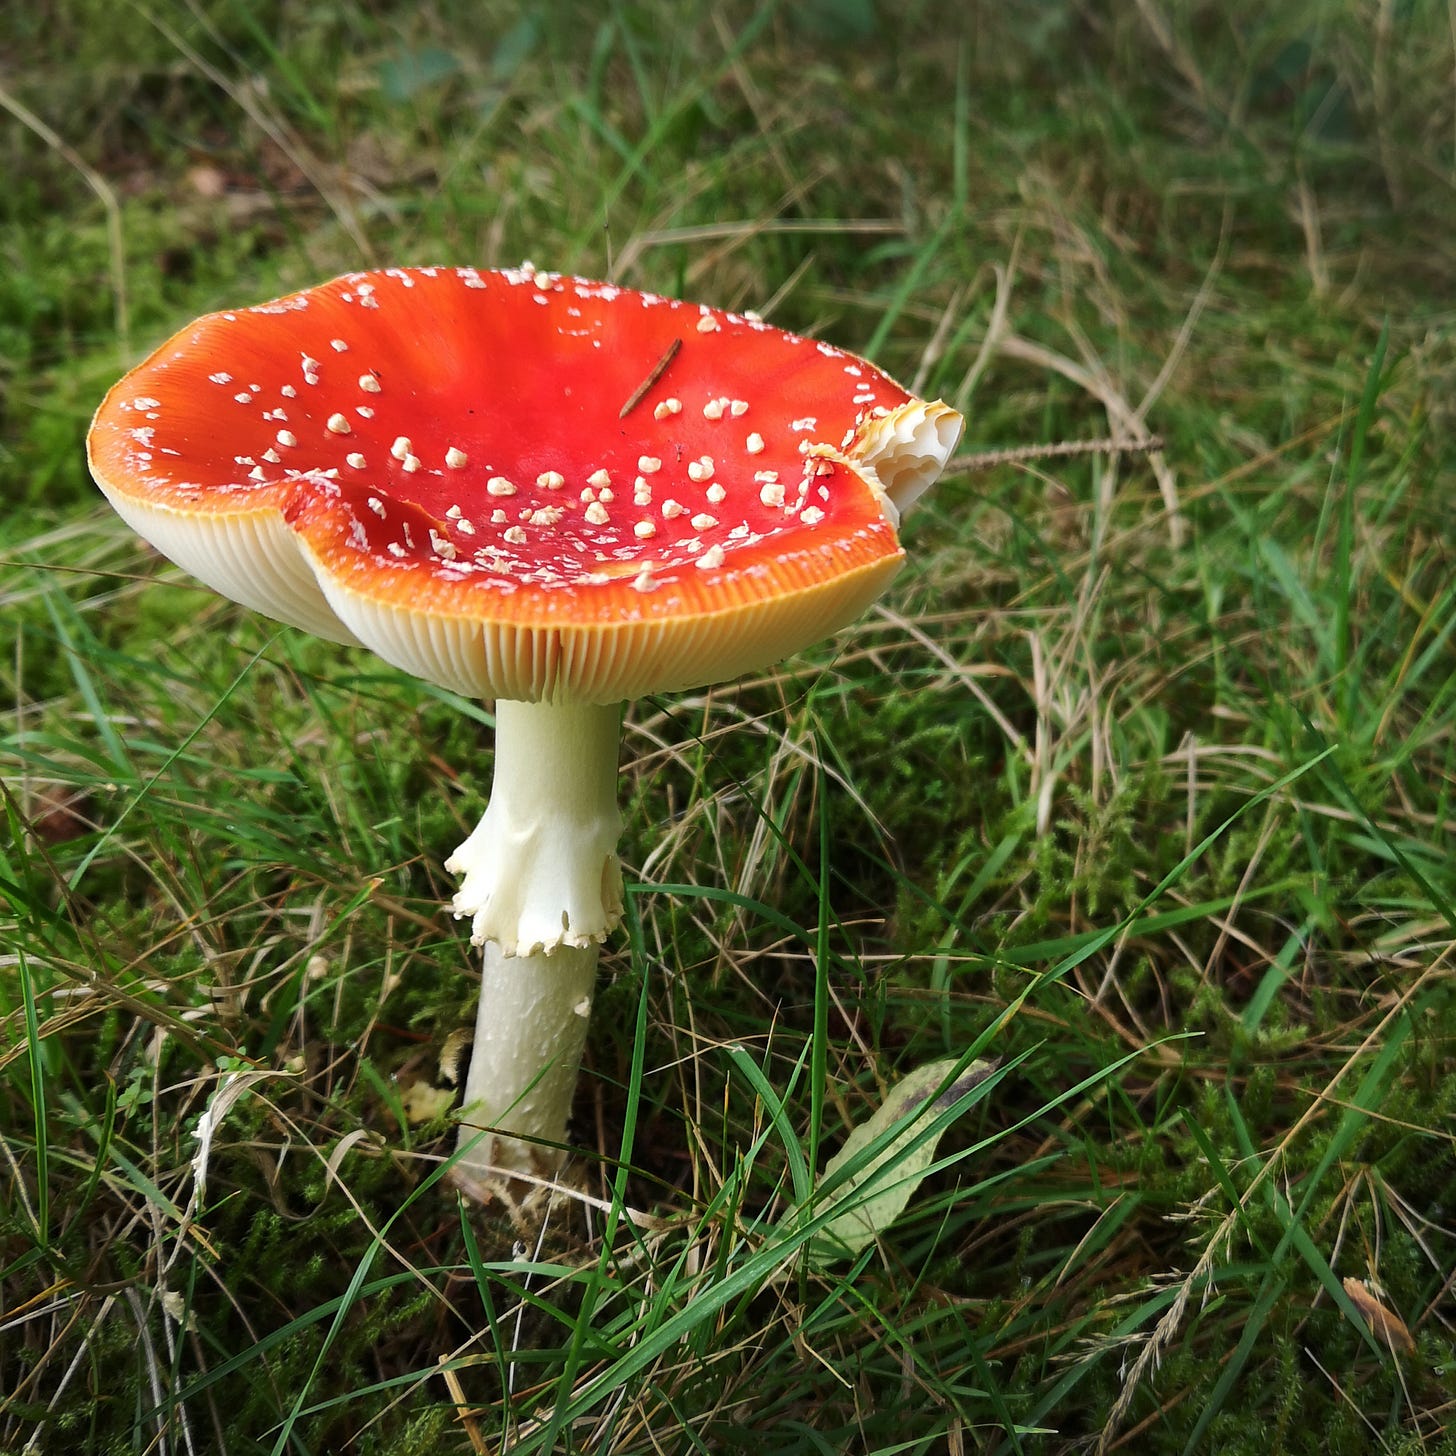 Image description: A mature fly agaric mushroom, with a tall white stalk and frilly skirt visible. The cap is upturned into a cup shape, with white gills showing beneath the surface of birhgt red flecked with white spots.